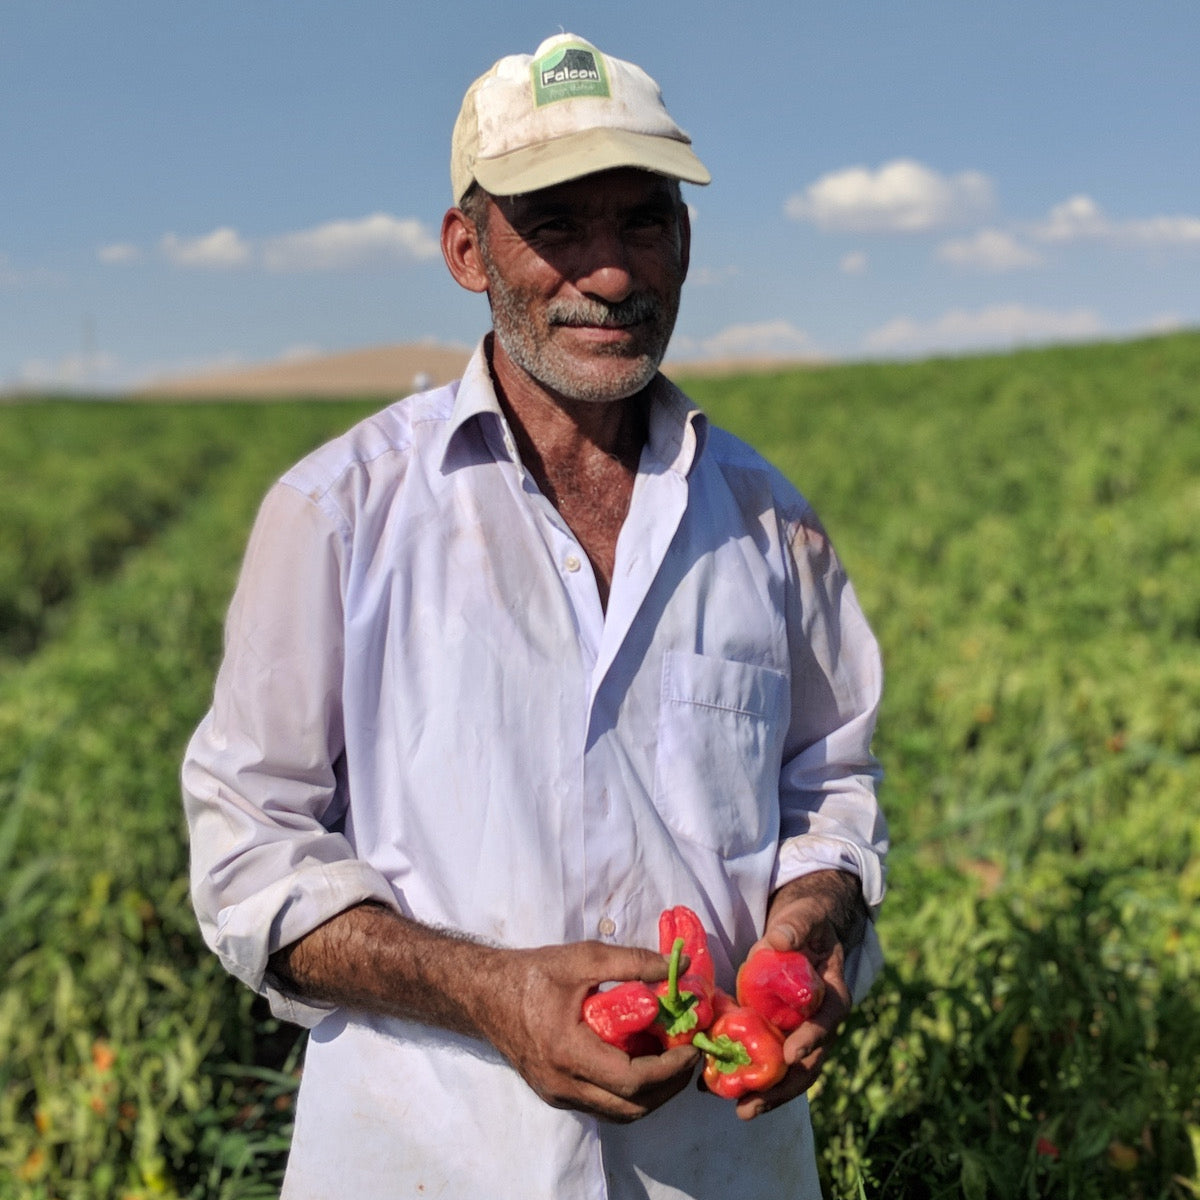 A chilis farmer in Tukry holding his peppers in a field.